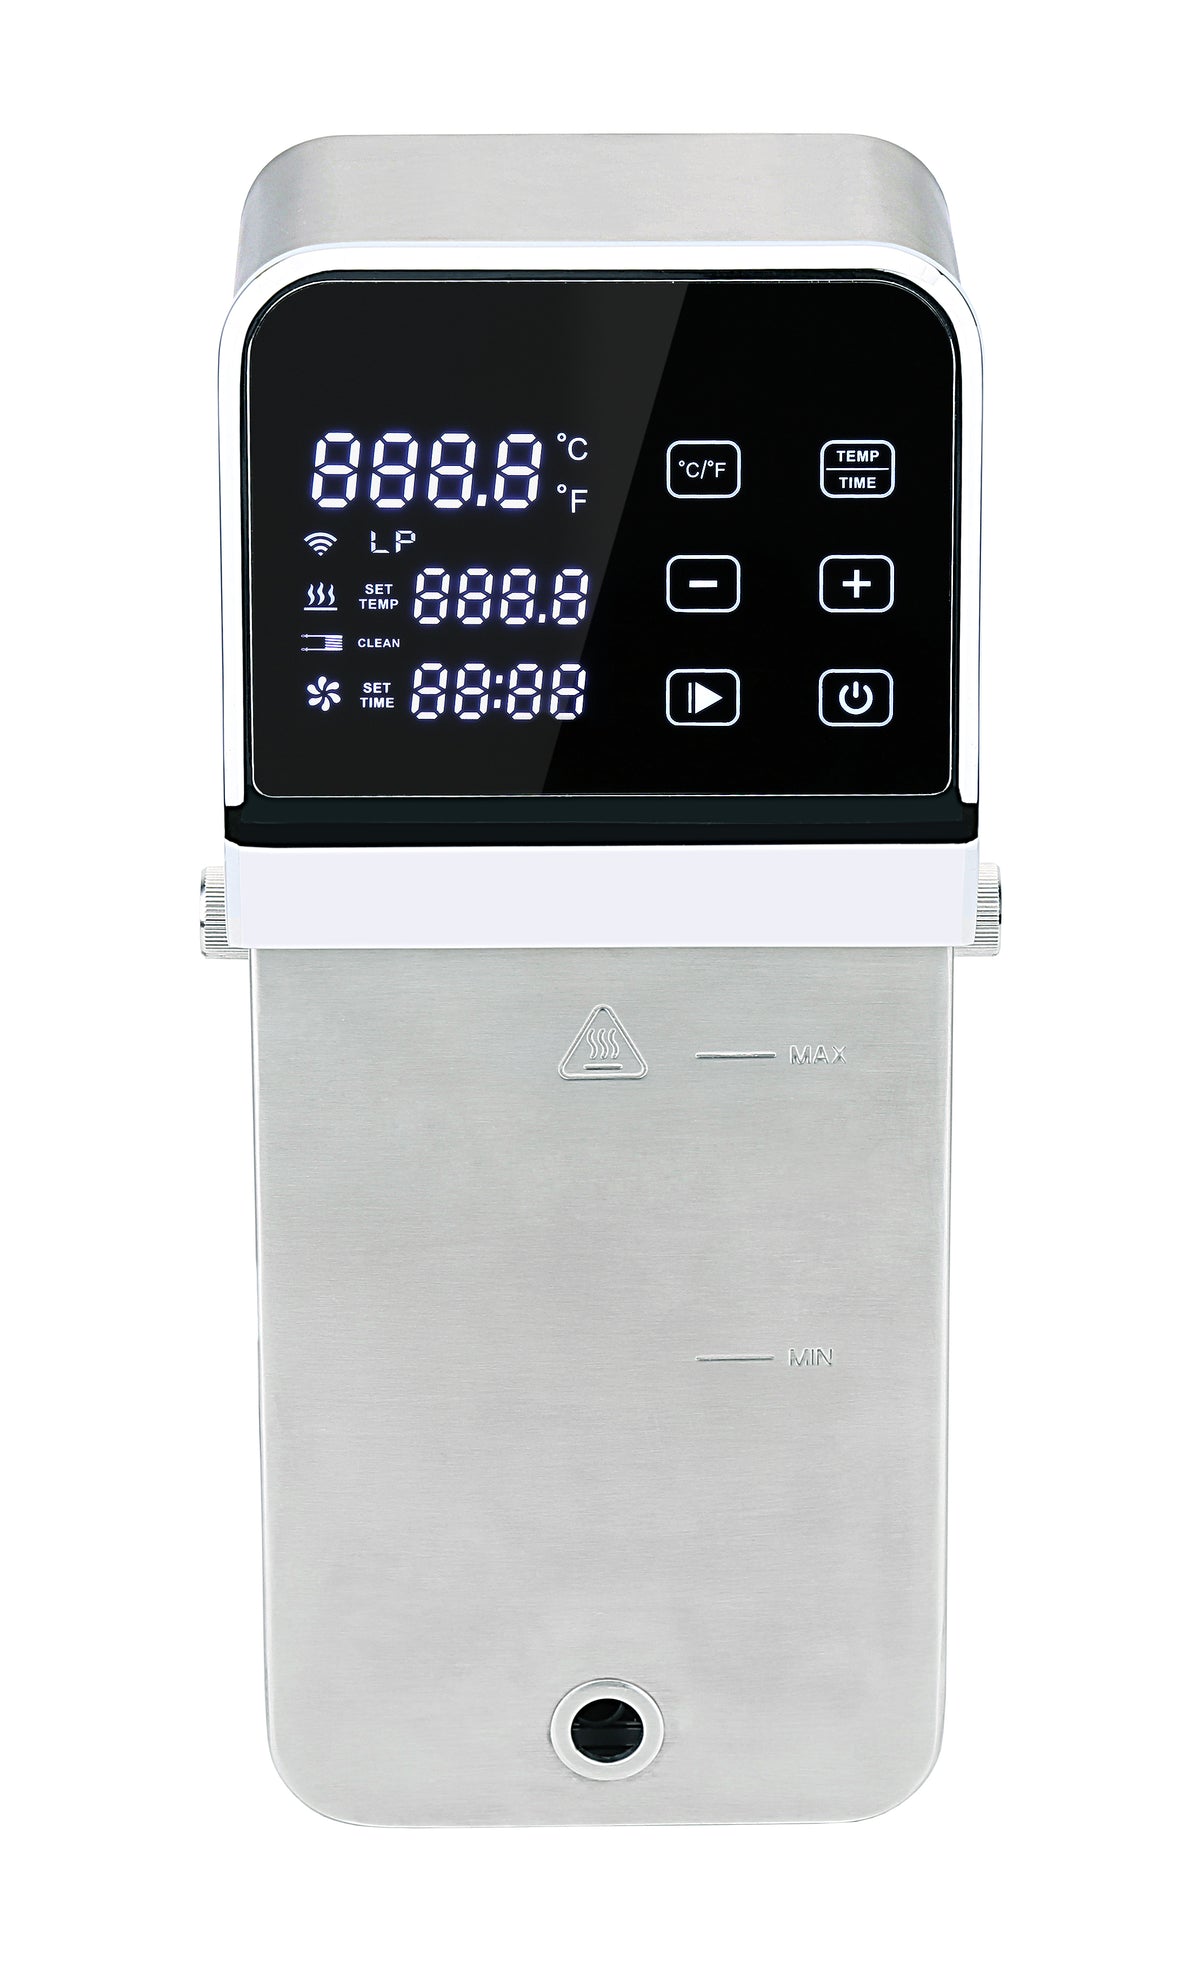 A picture of the front of the SV330 Imersa Tower immersion circulator. 